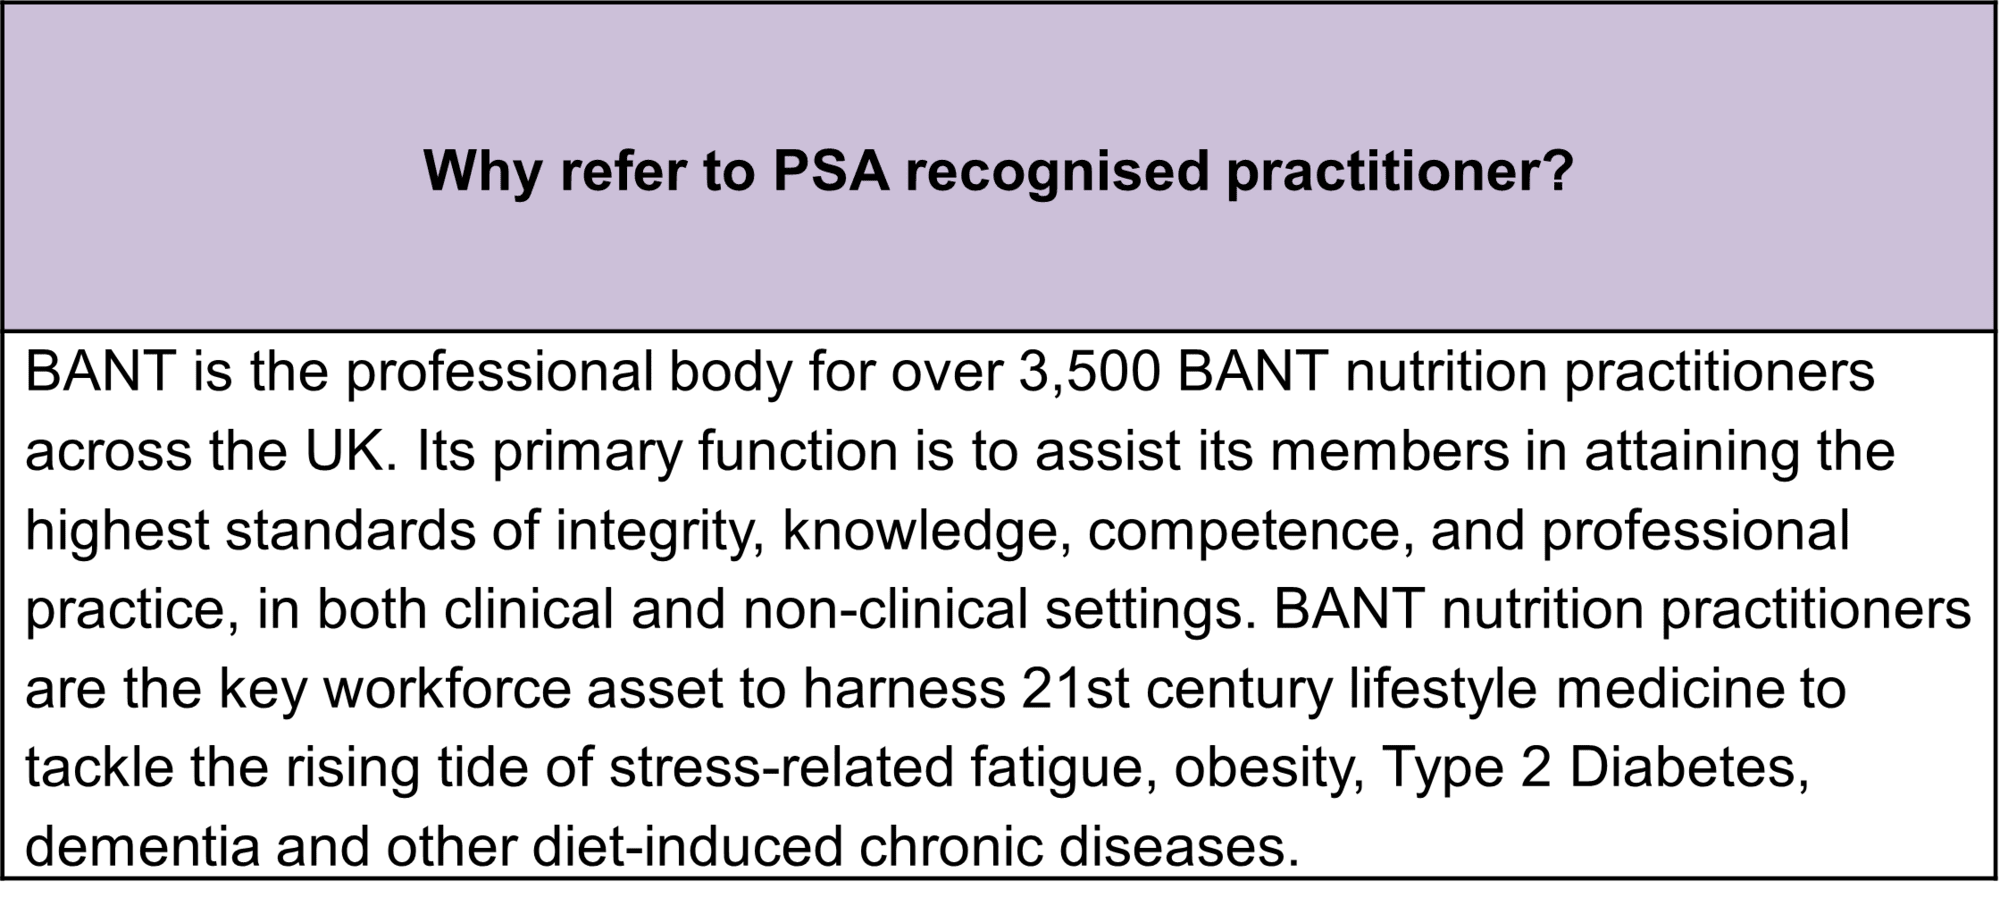 Why refer to PSA recognised practitioner?